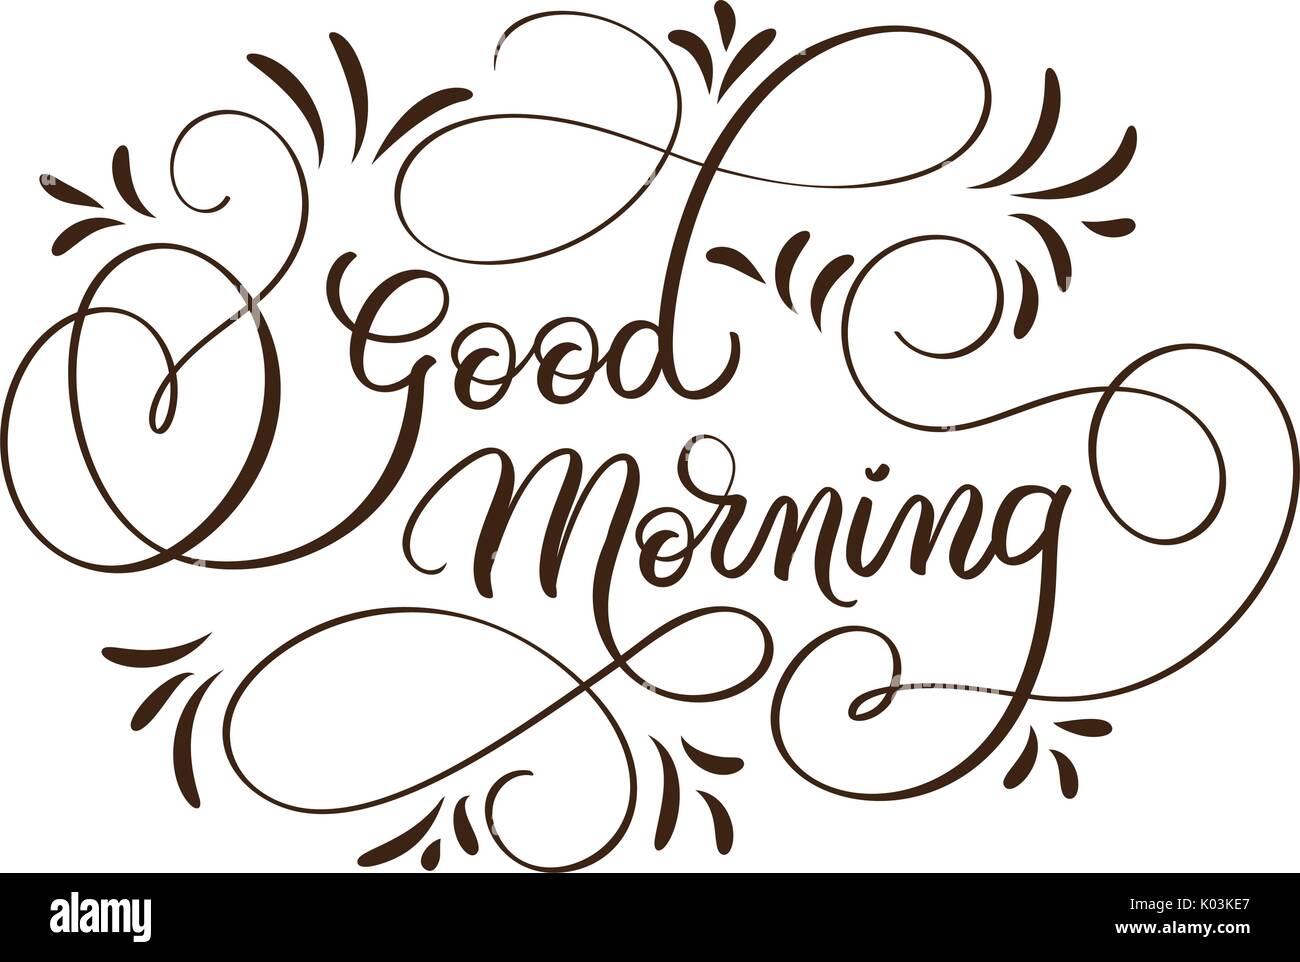 Today is a good day hand written lettering Vector Image